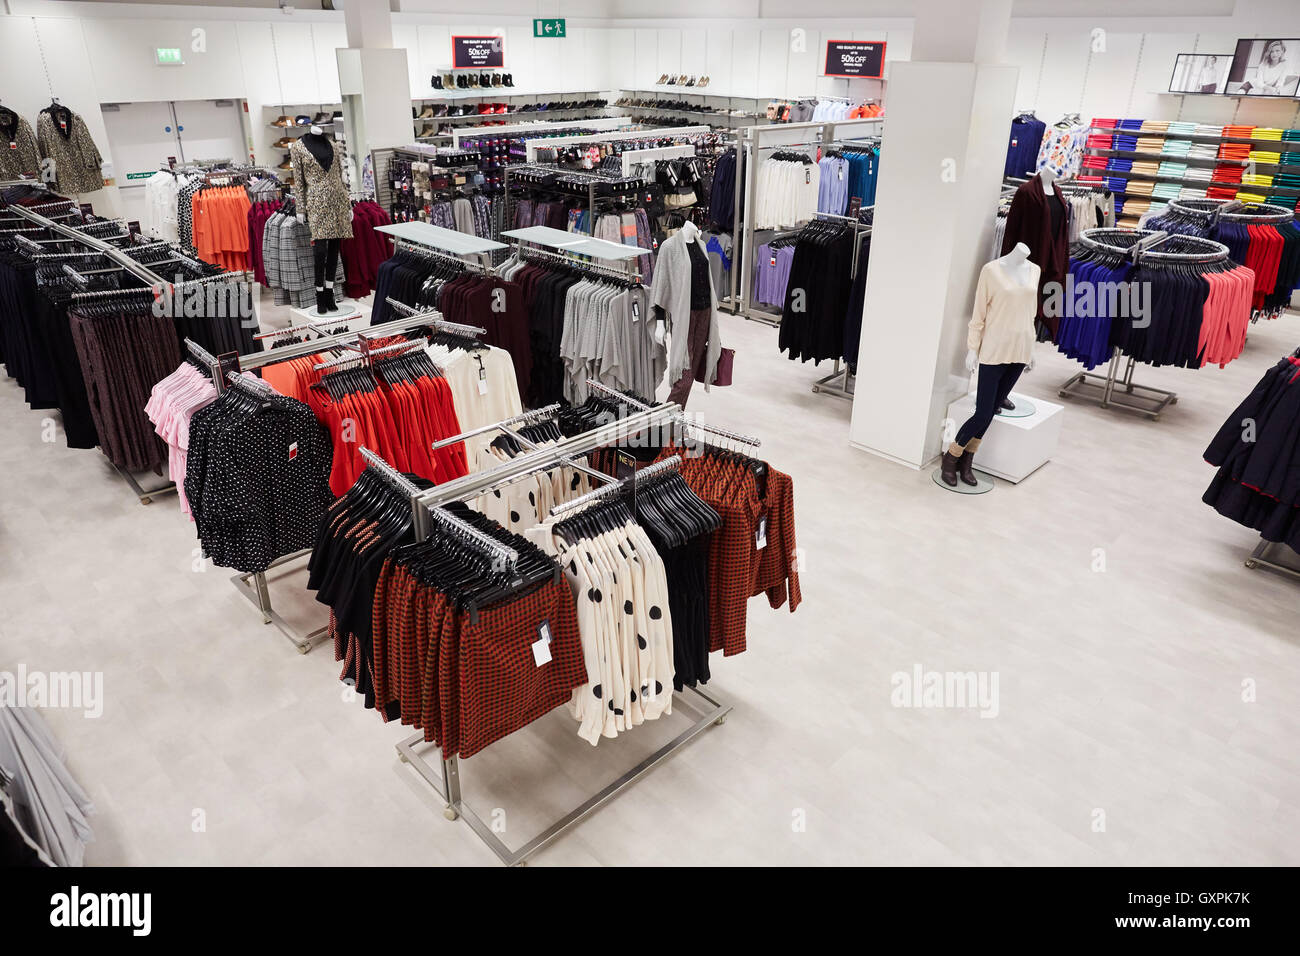 clearance section of a clothing store Stock Photo - Alamy